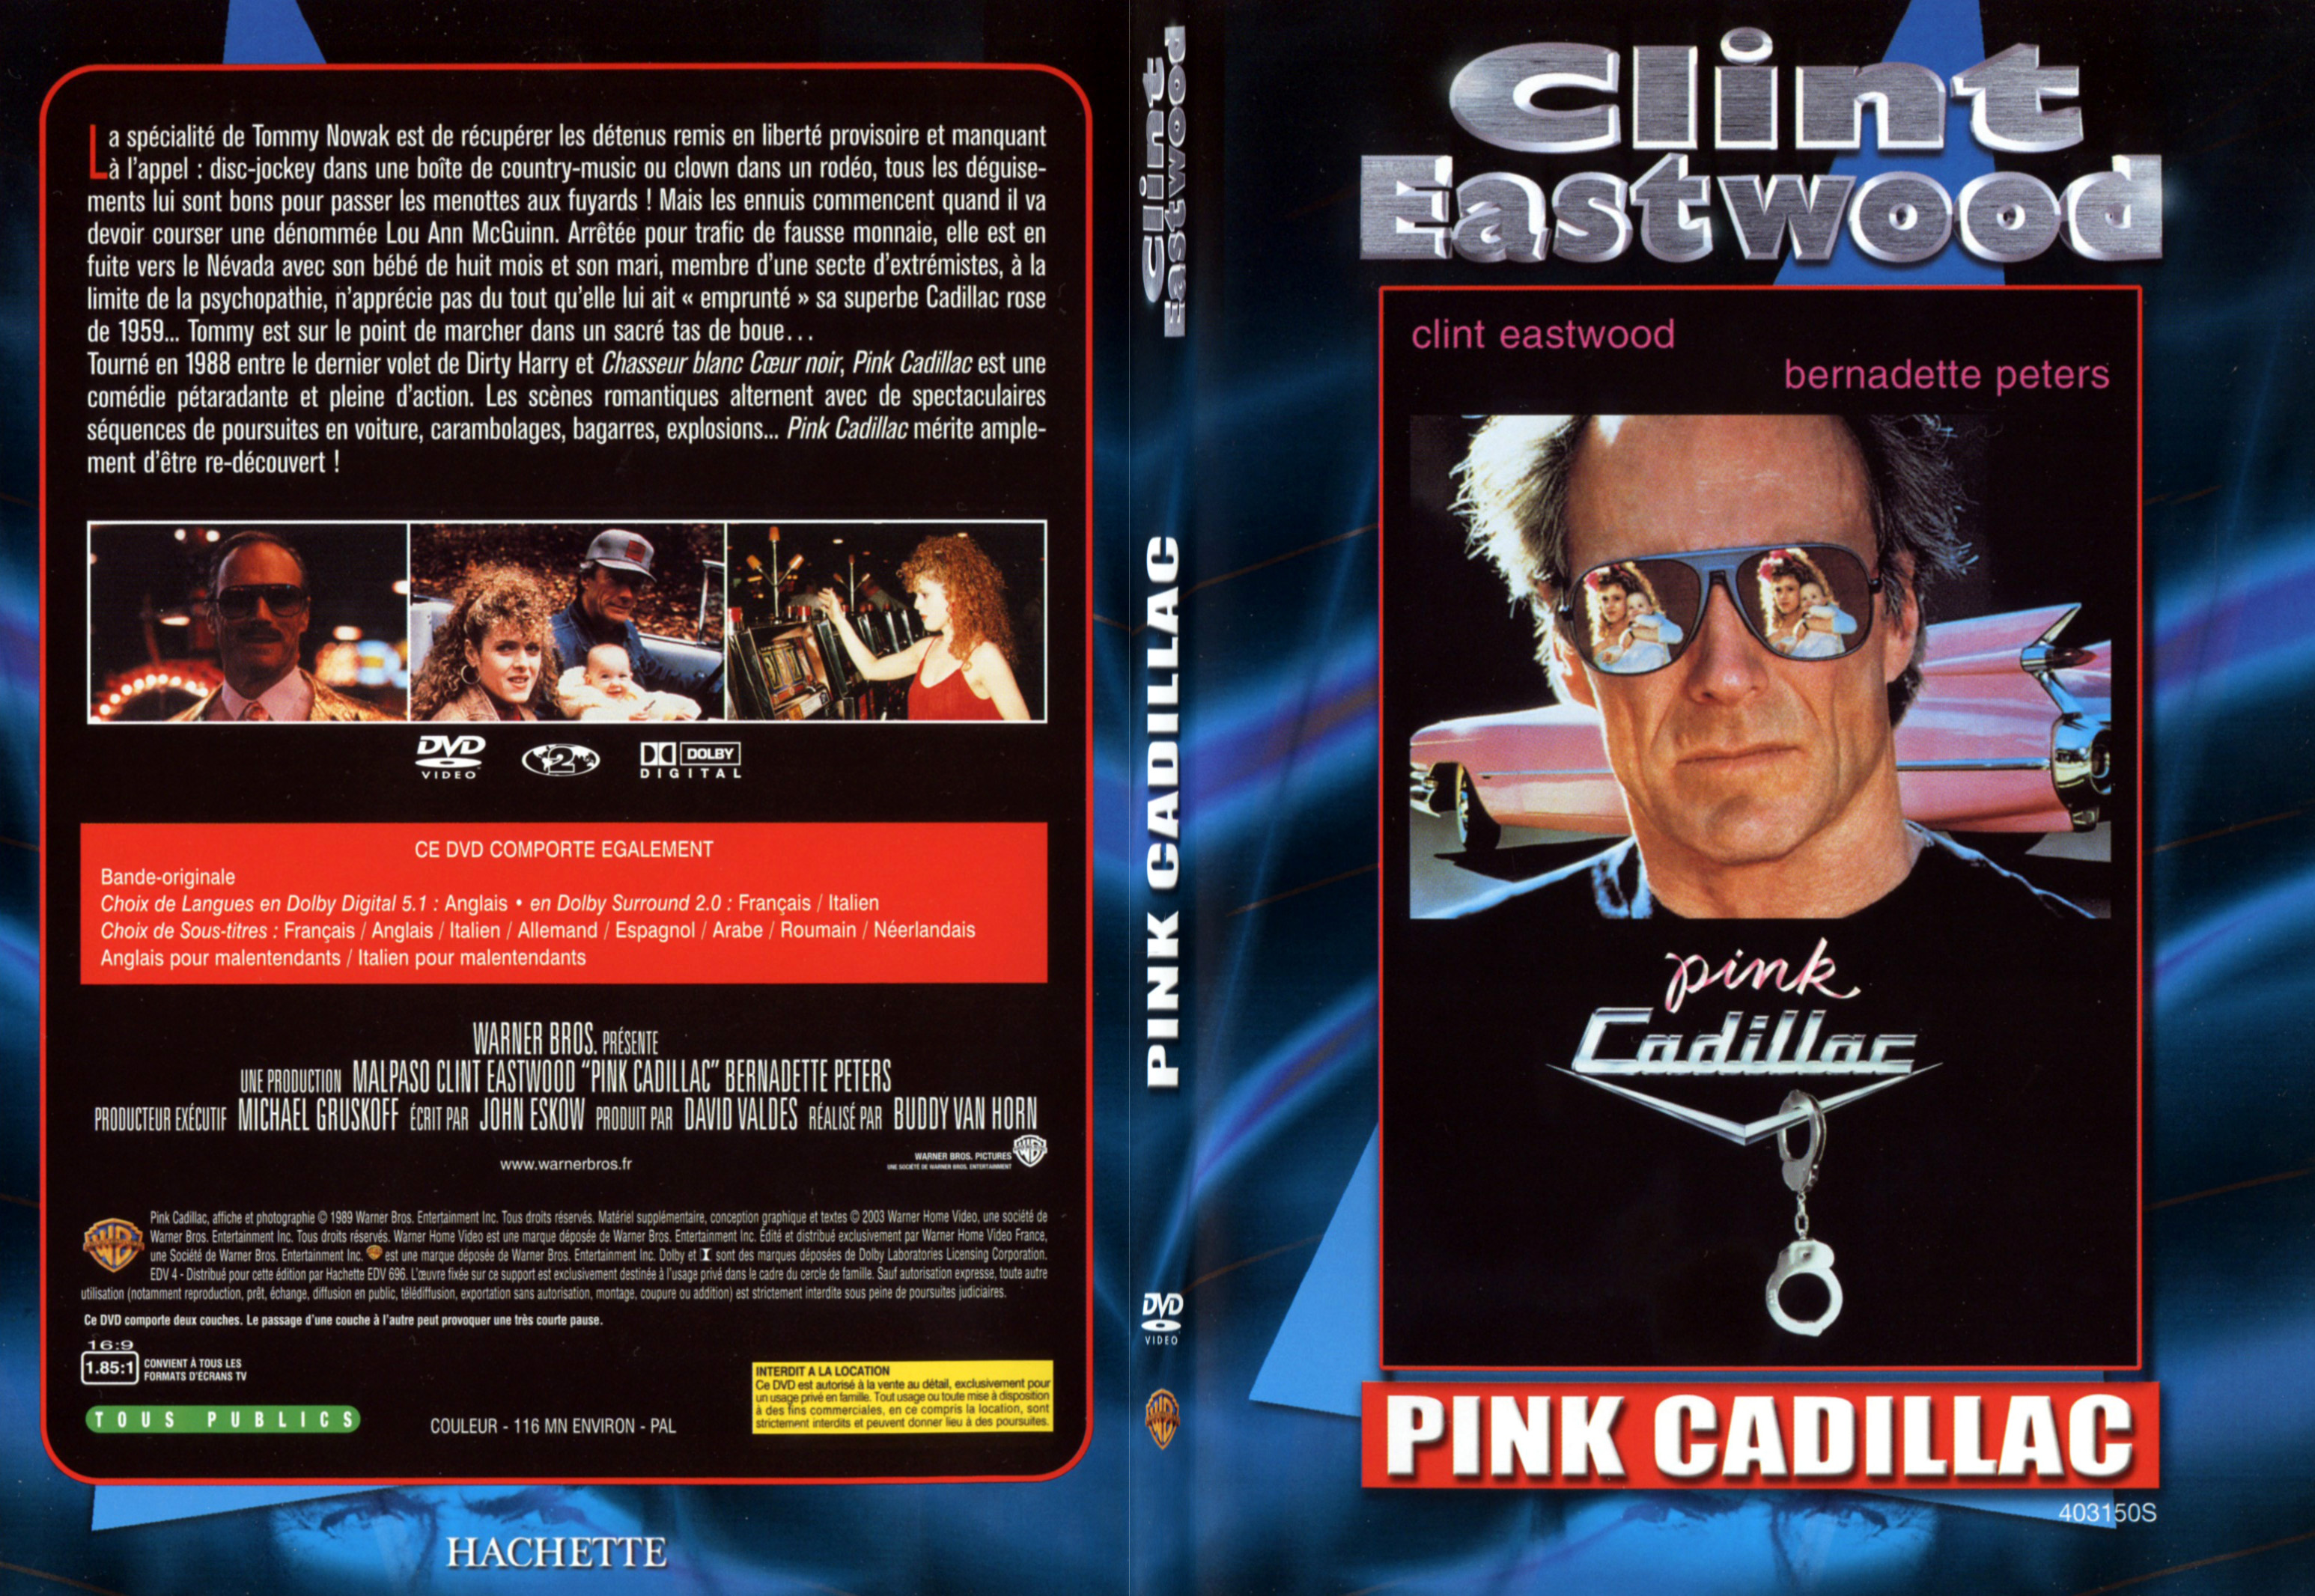 Jaquette DVD Pink Cadillac - SLIM